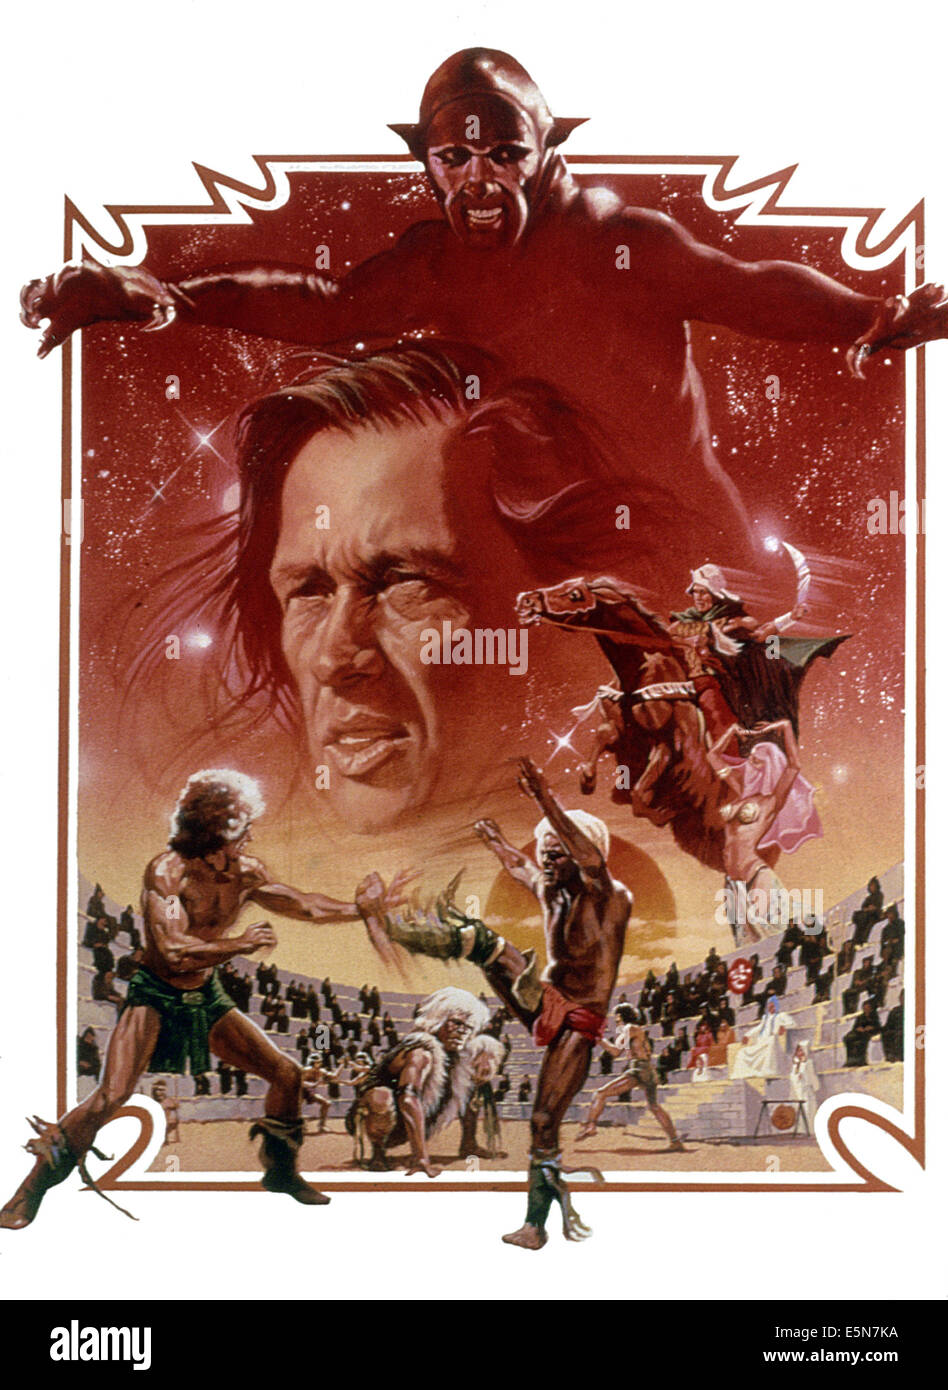 CIRCLE OF IRON, David Carradine, 1978, (c) AVCO Embassy Pictures/ Courtesy: Everett Collection Stock Photo